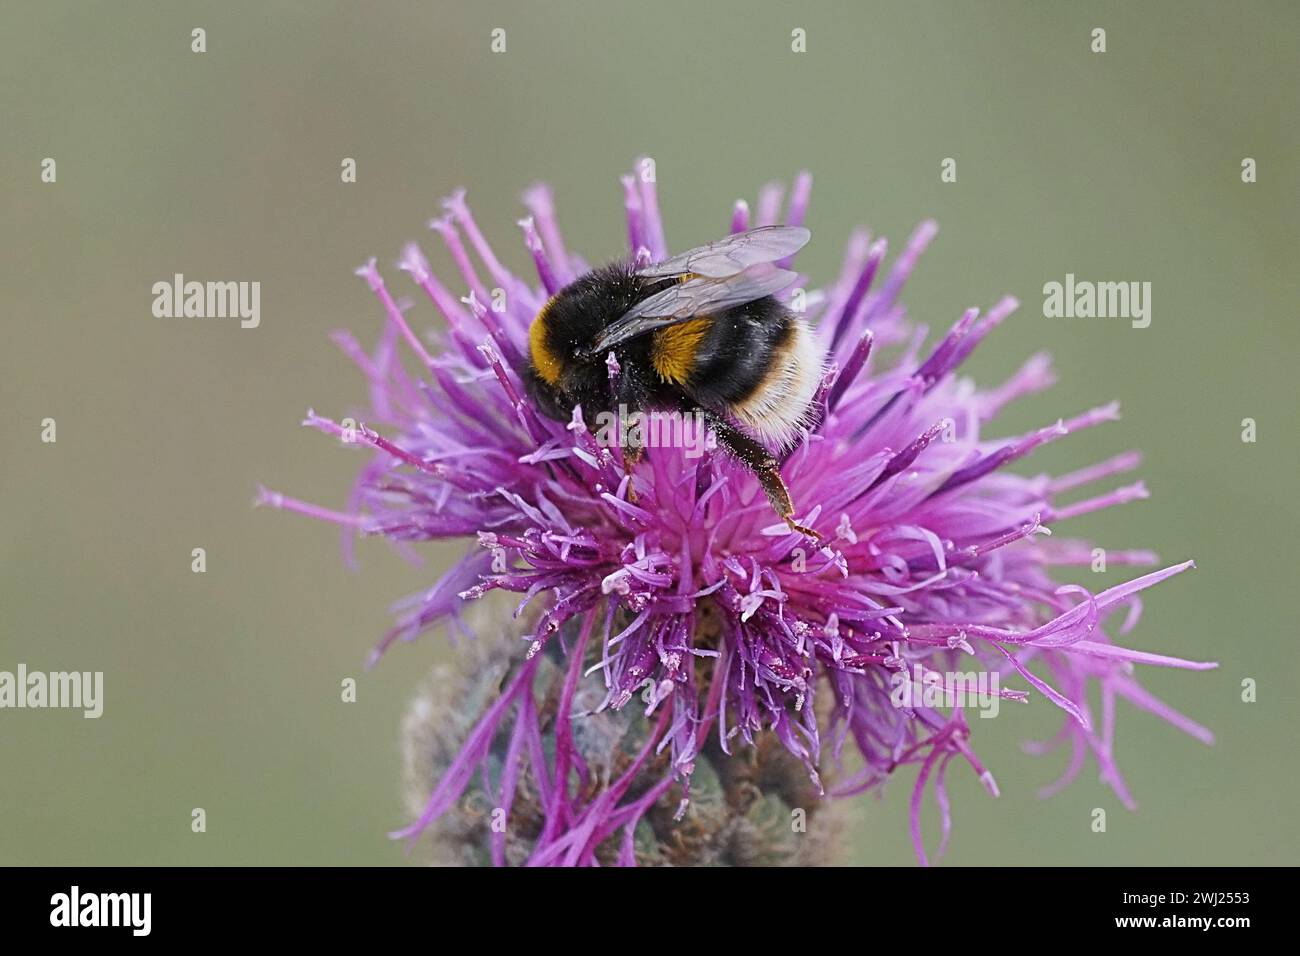 A bumblebee takes pollen from a purple flower. Close-up macro photograph Stock Photo